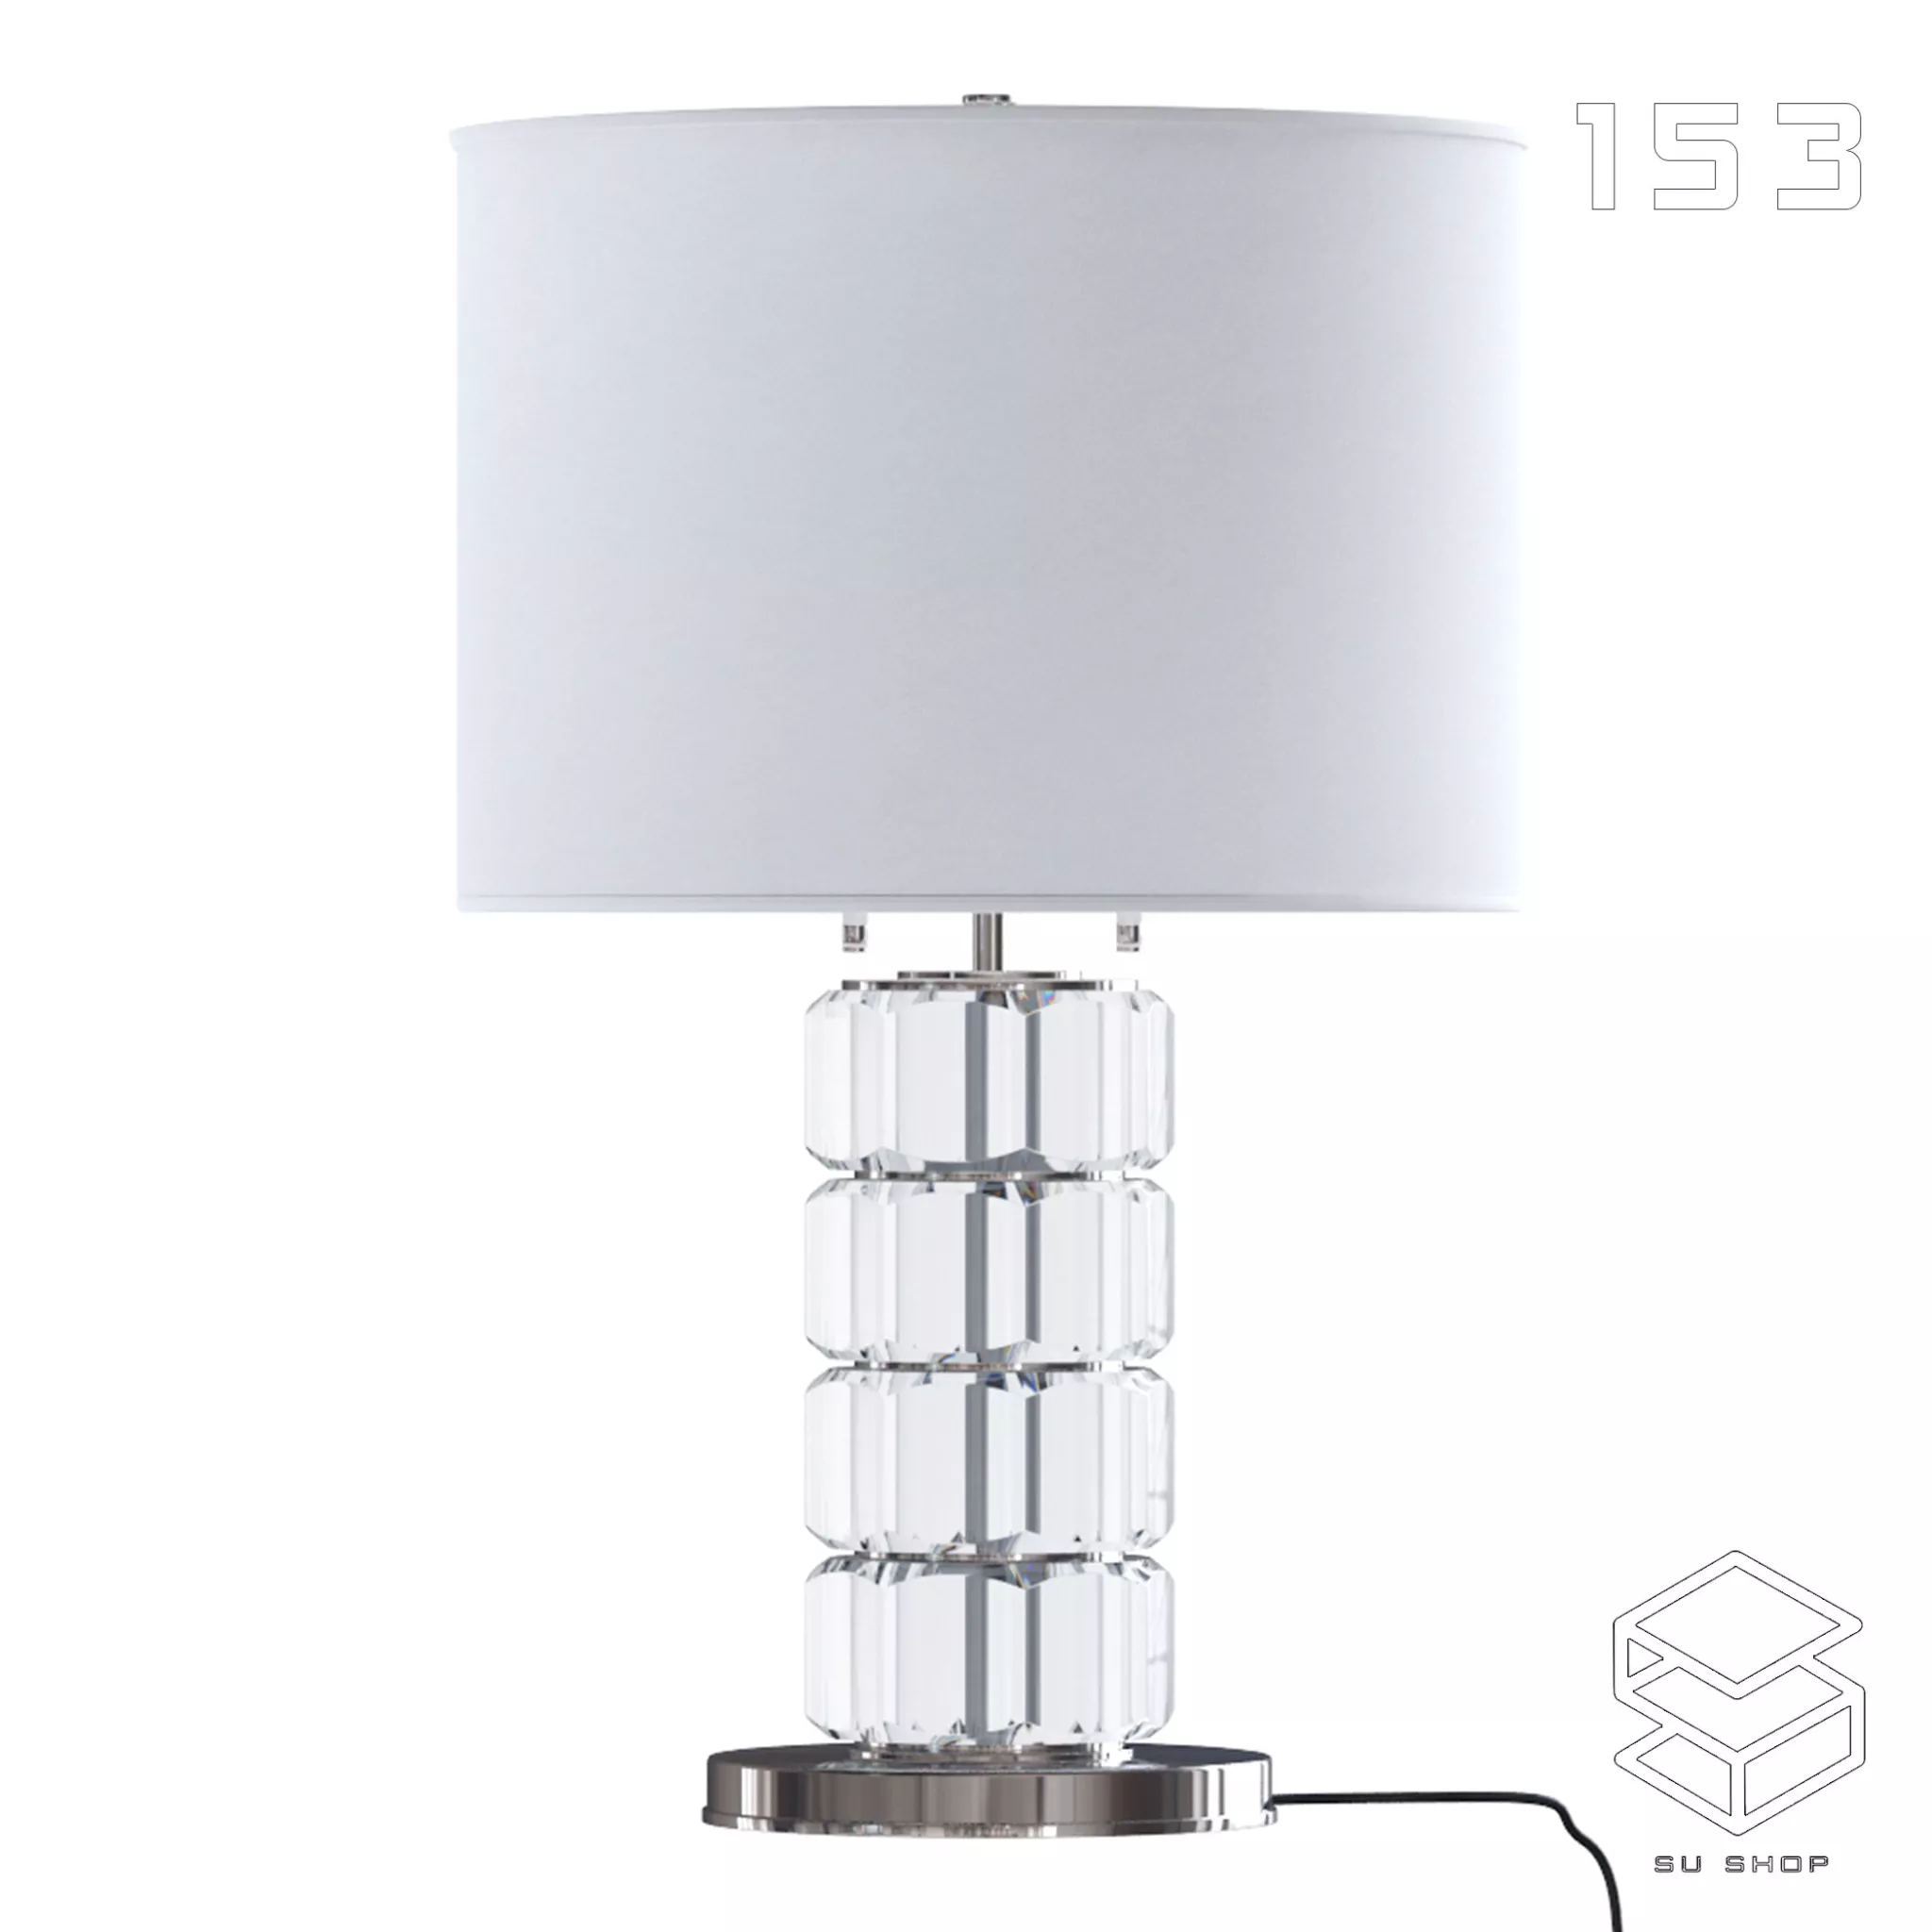 MODERN TABLE LAMP - SKETCHUP 3D MODEL - VRAY OR ENSCAPE - ID14723